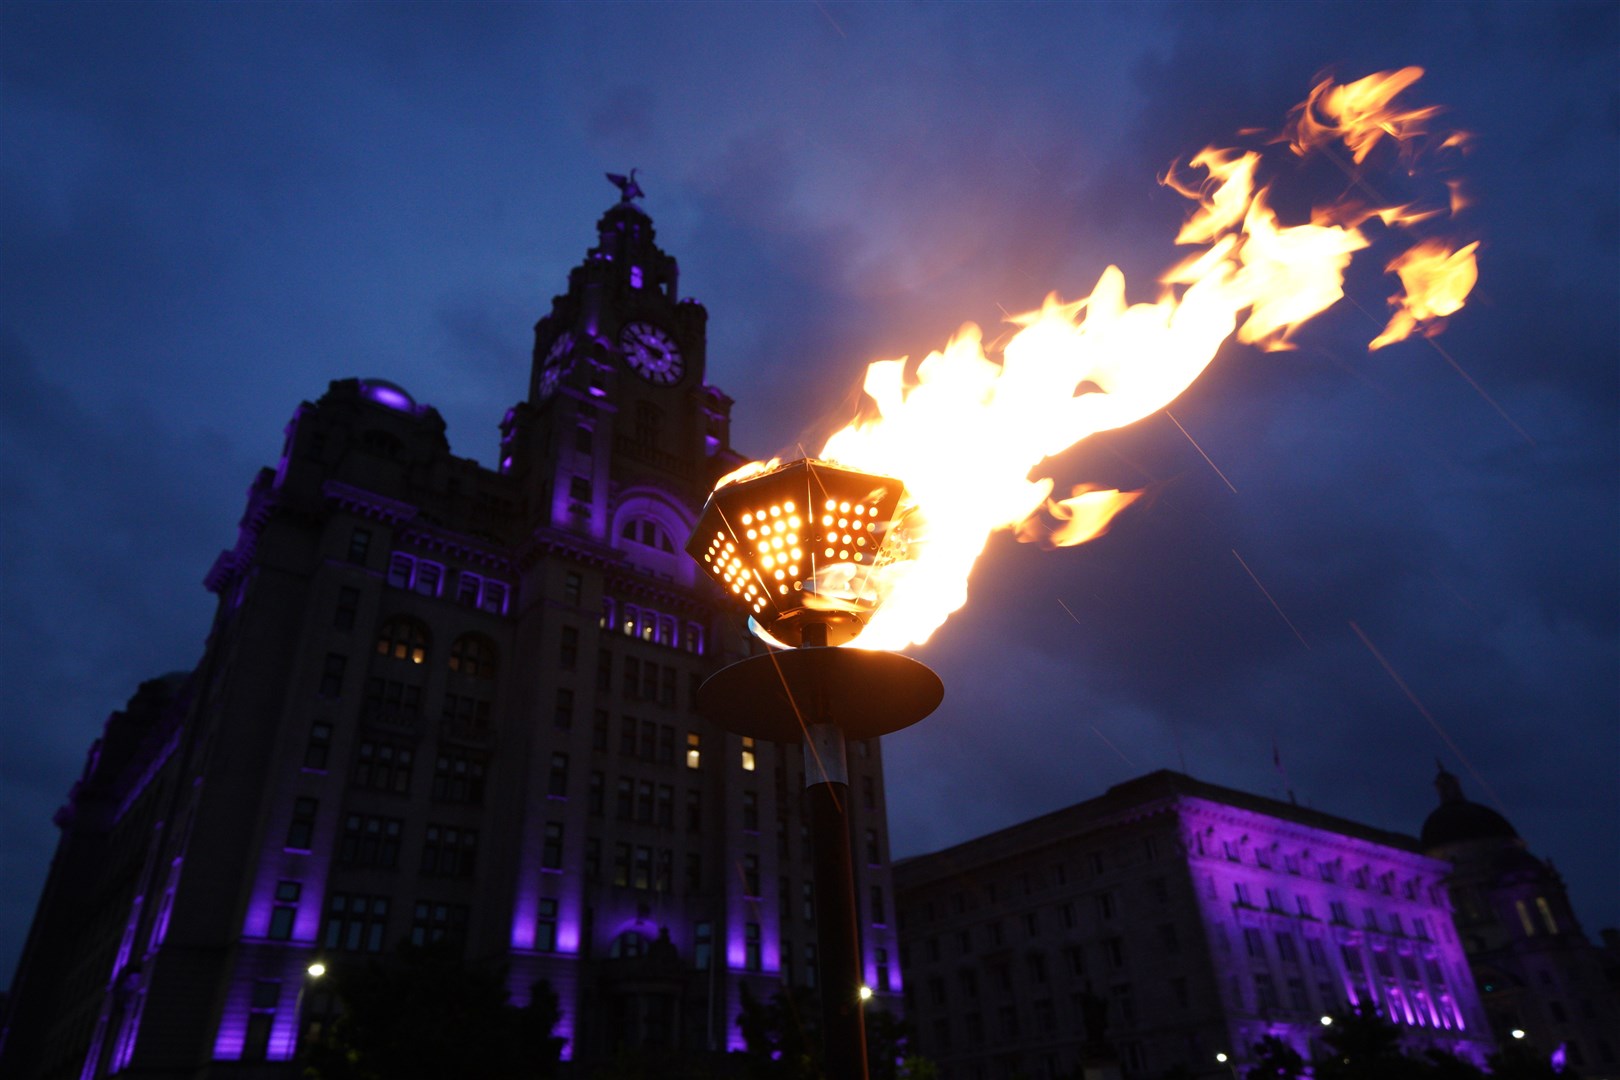 Beacons are lit outside the Royal Liver Building in Liverpool (Peter Byrne/PA)